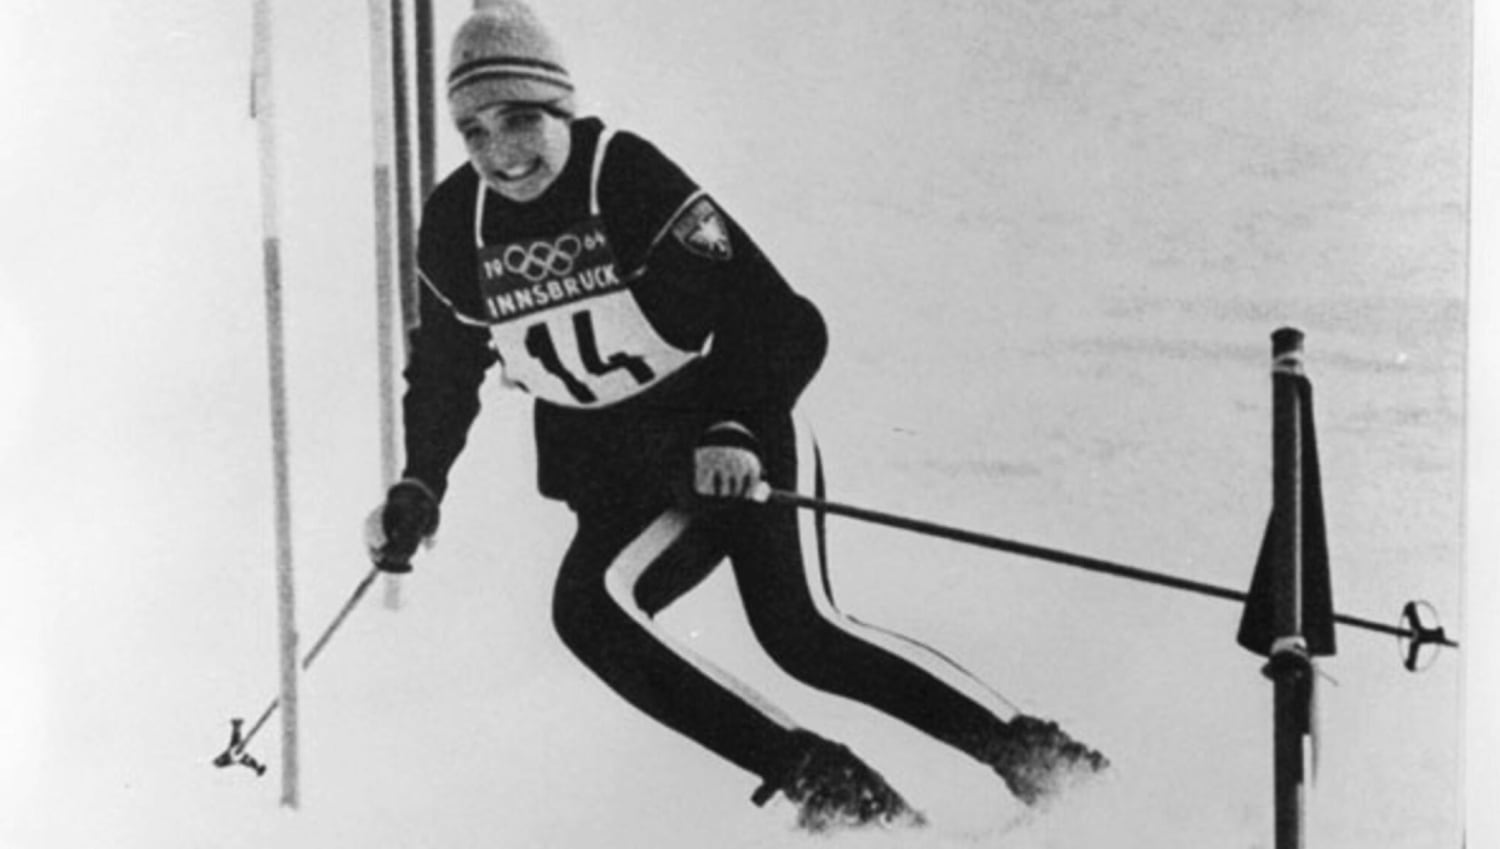 The unique achievement of sisters Marielle and Christine Goitschel at Innsbruck 1964